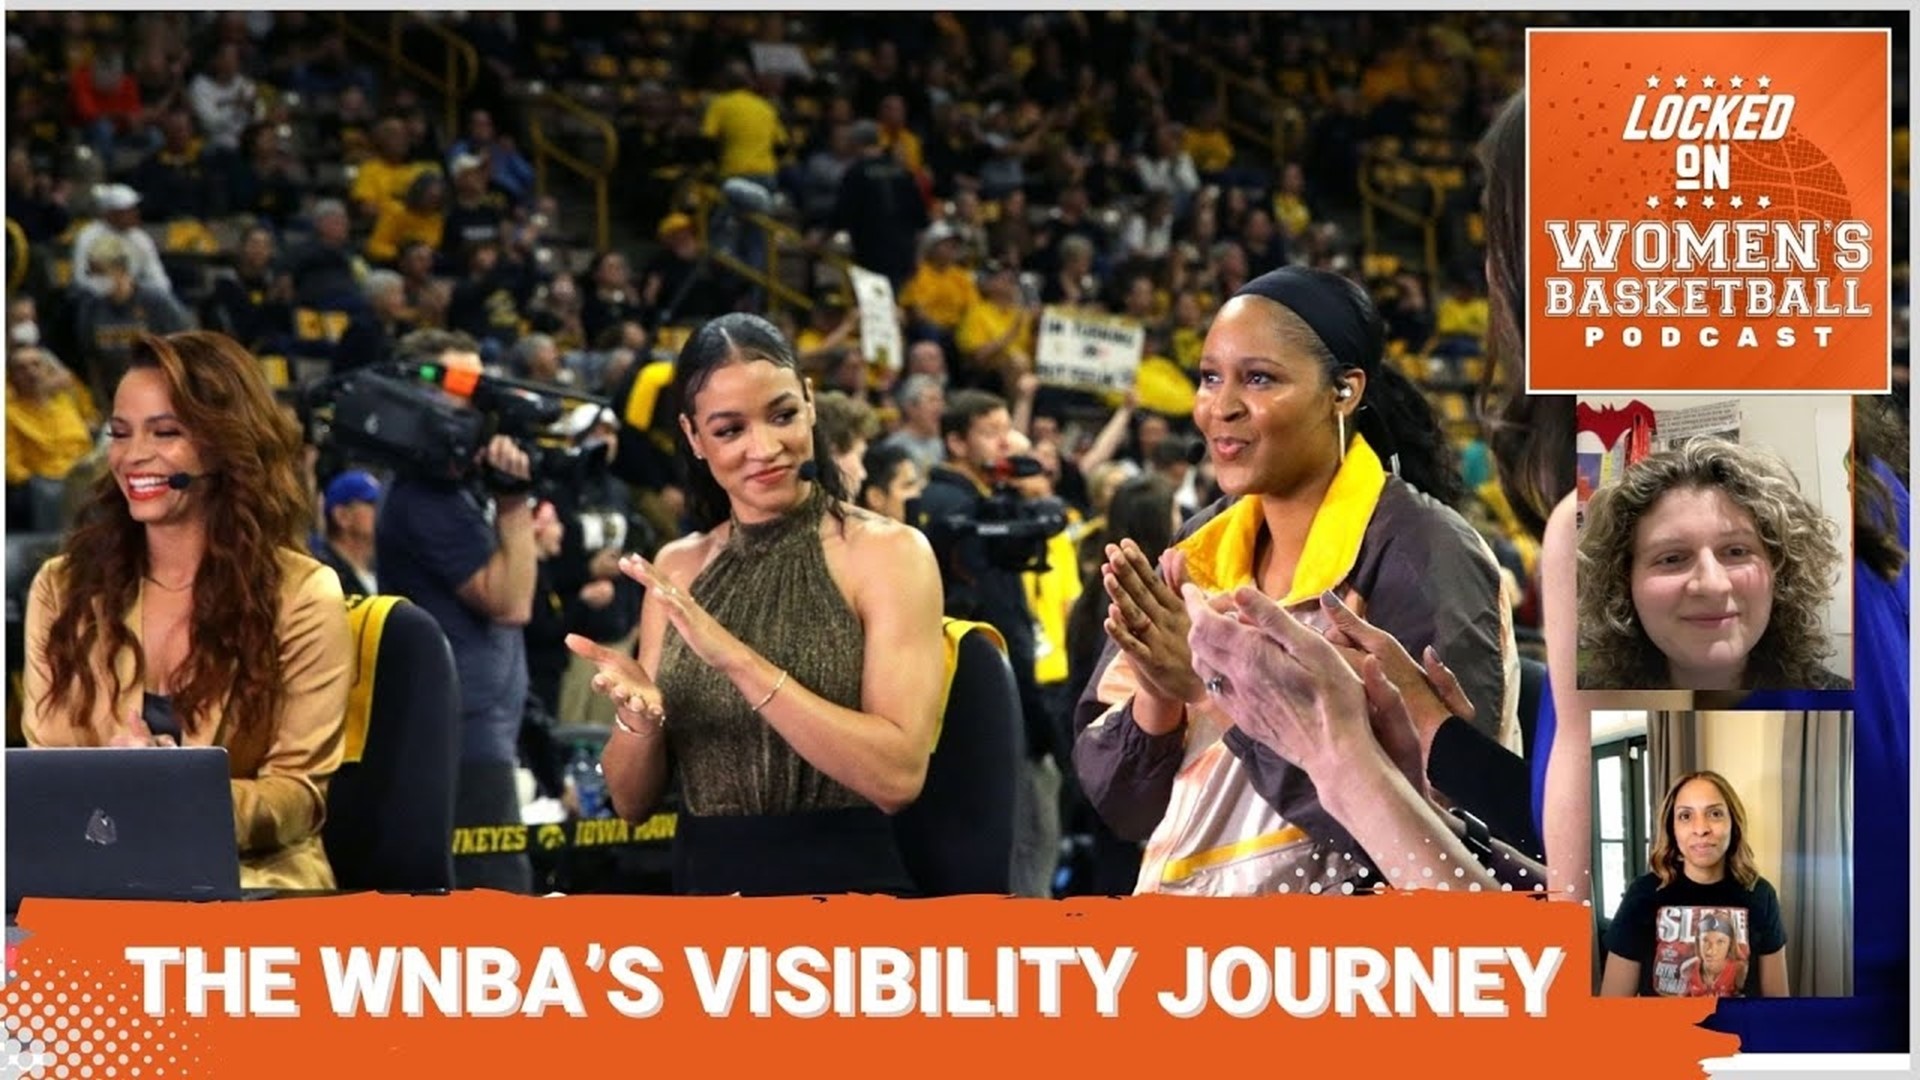 Host Jackie Powell is joined by ESPN’s LaChina Robinson to examine how the WNBA’s perceptions and visibility in popular culture have evolved.